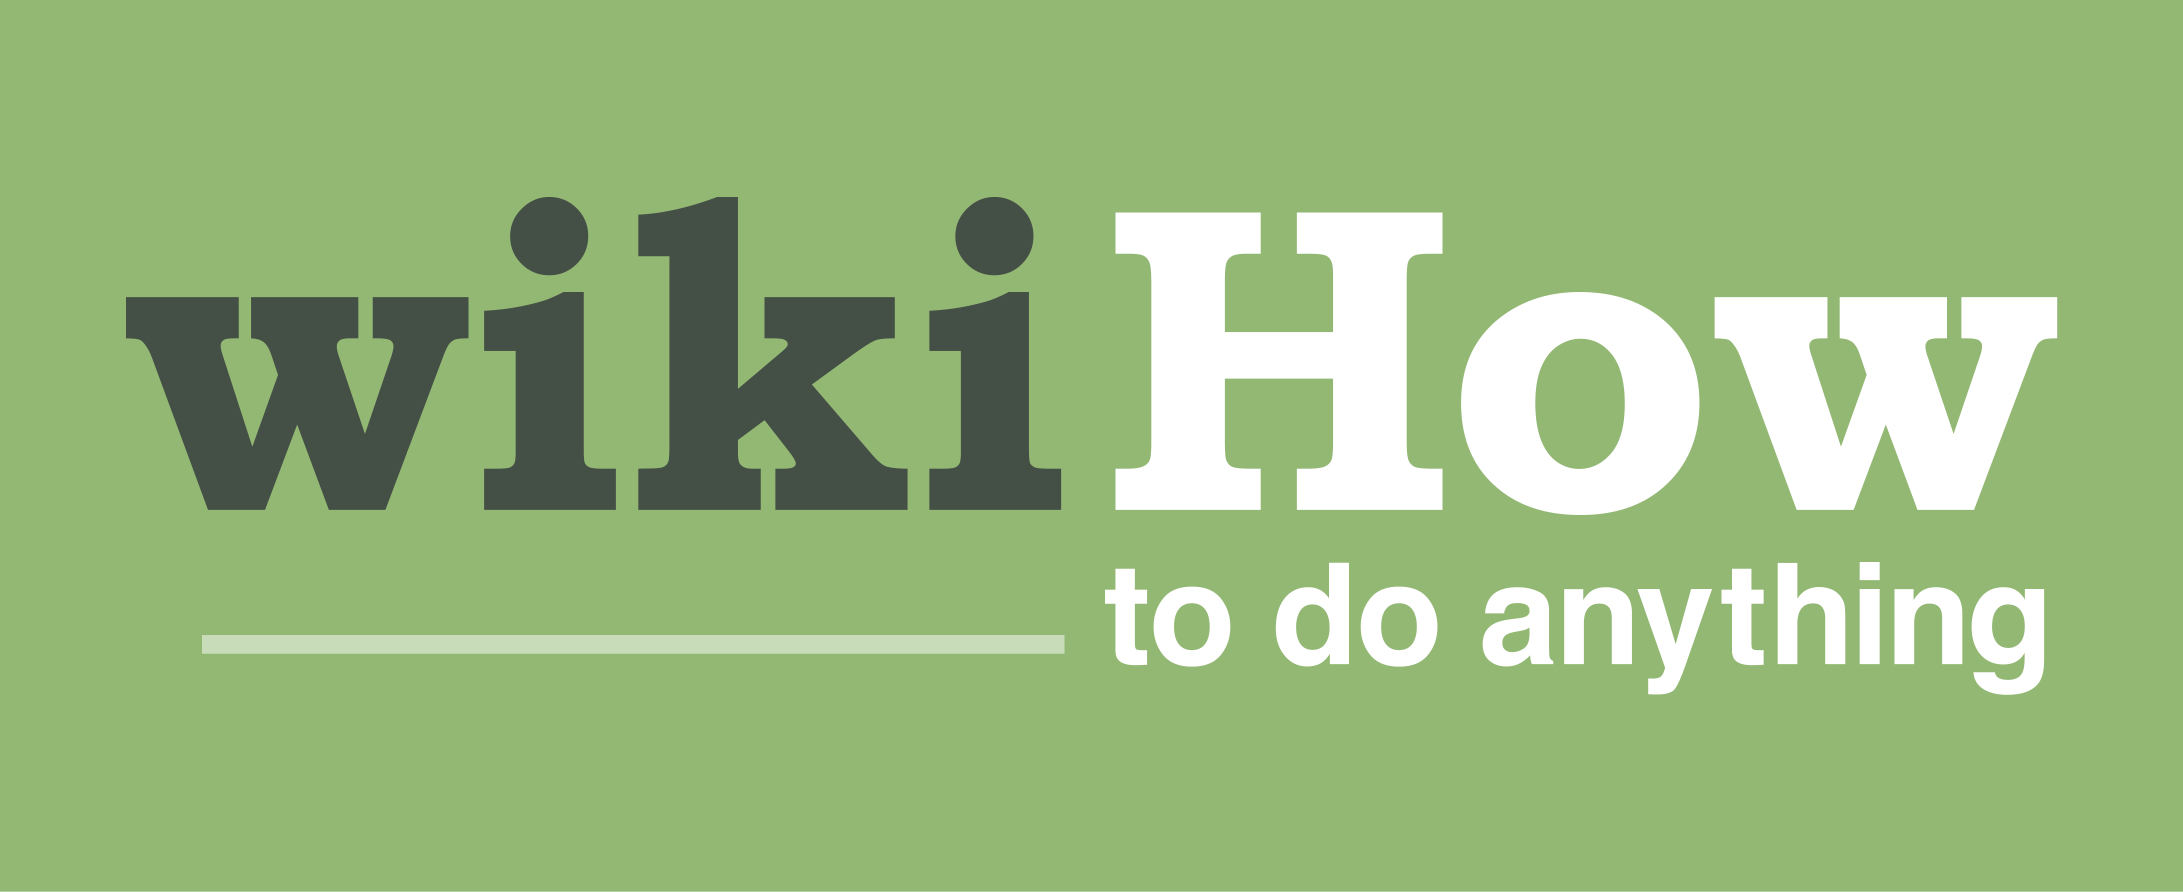 wikiHow Logo - File:WikiHow logo - primary 2014.png - Wikimedia Commons